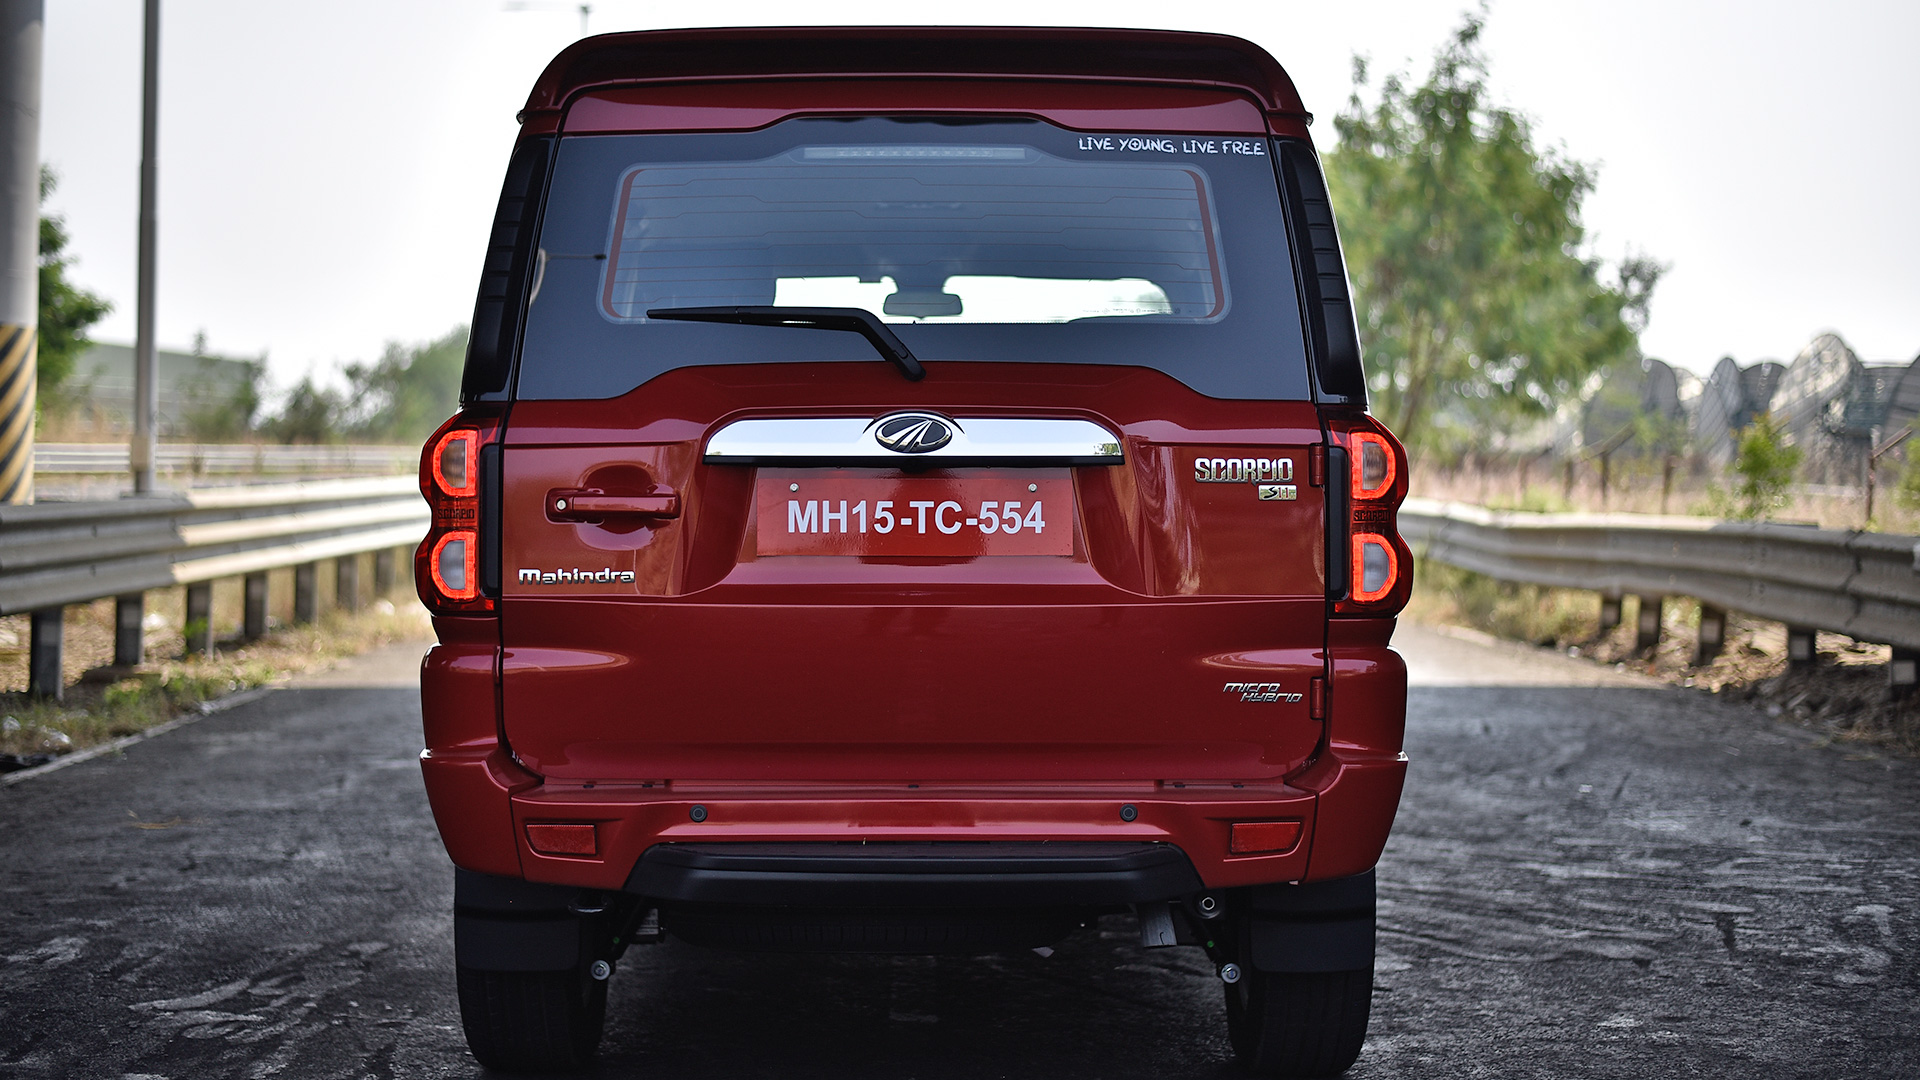 Mahindra Scorpio 18 S11 Price Mileage Reviews Specification Gallery Overdrive